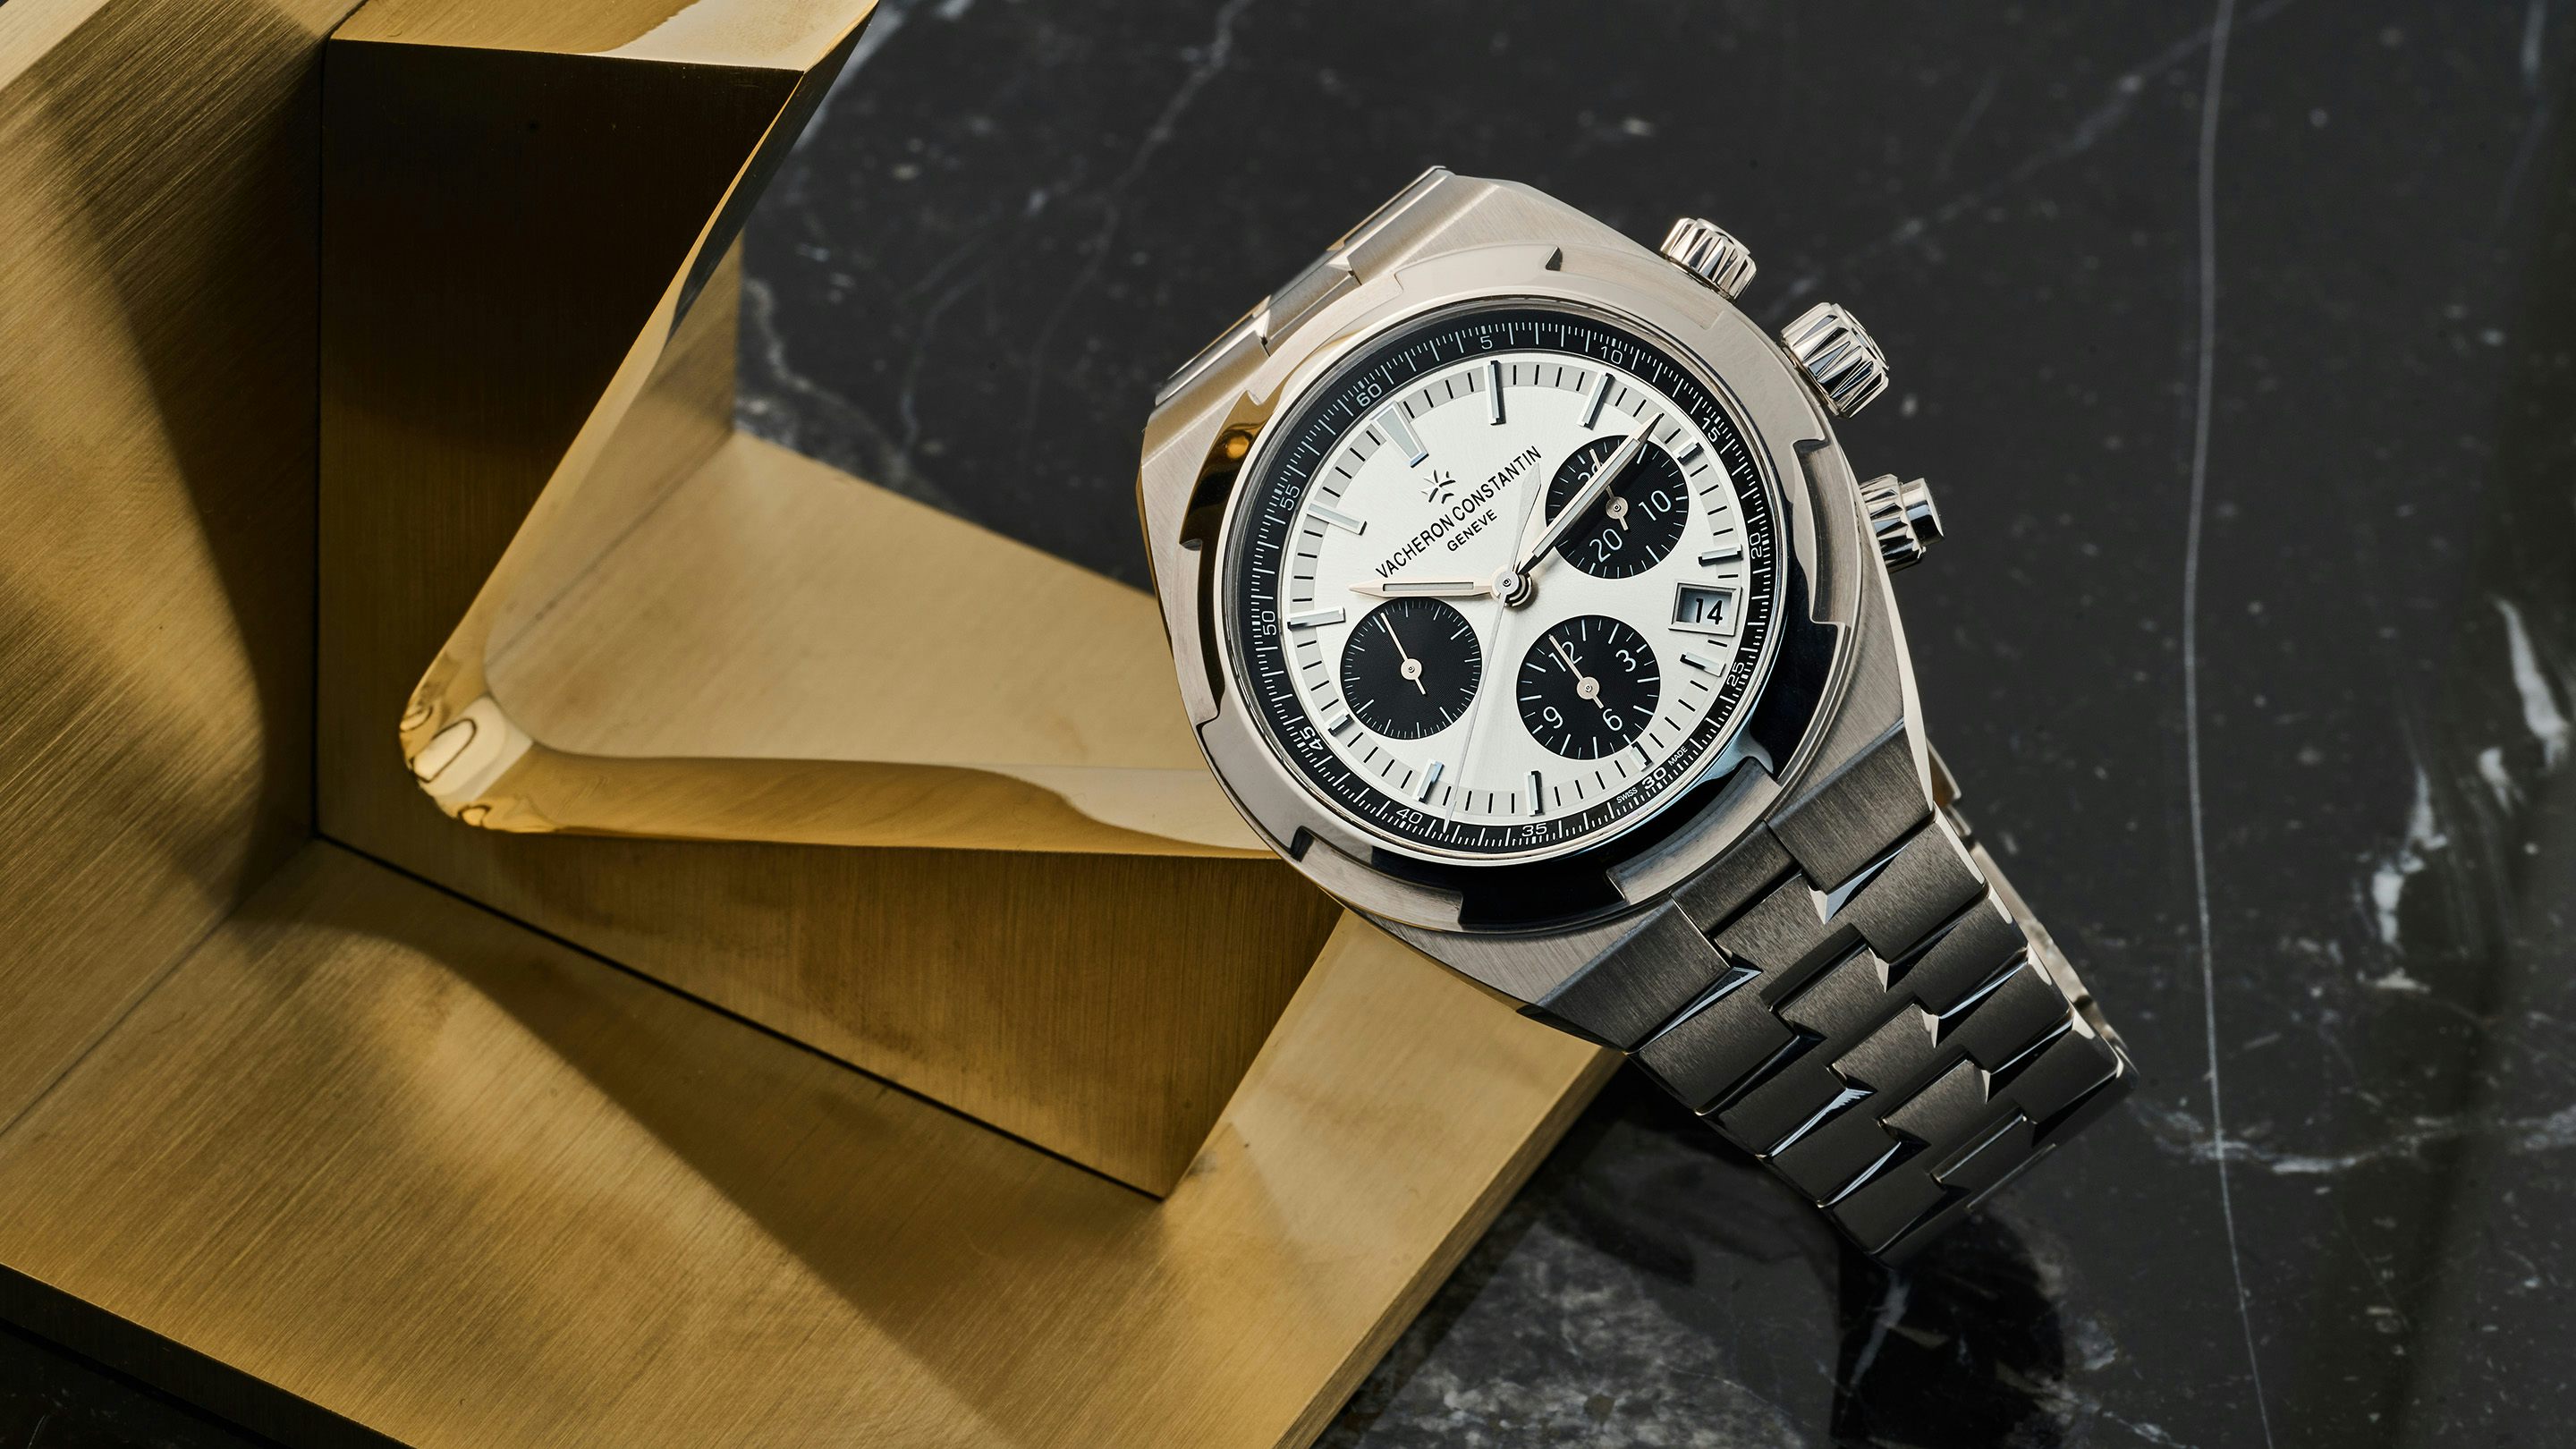 24 Hours Later: Vacheron Constantin Goes for Versatility with the New  Overseas Chronograph “Panda”